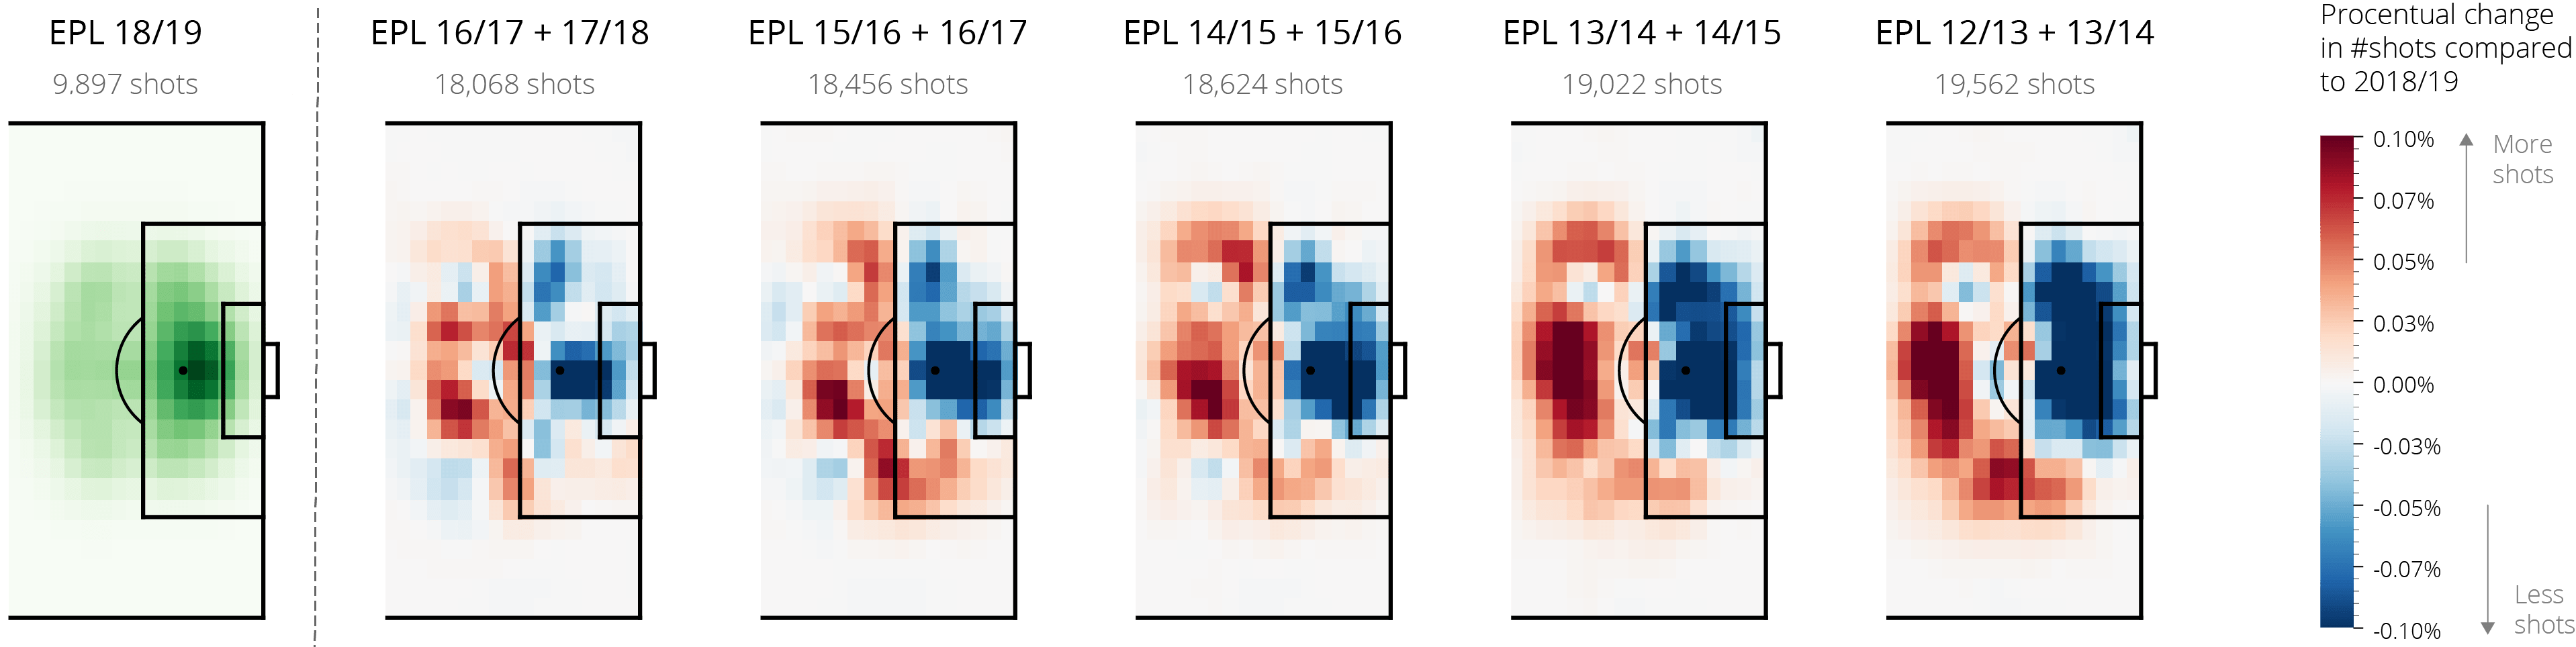 Evolution of shot locations in the Premier League.